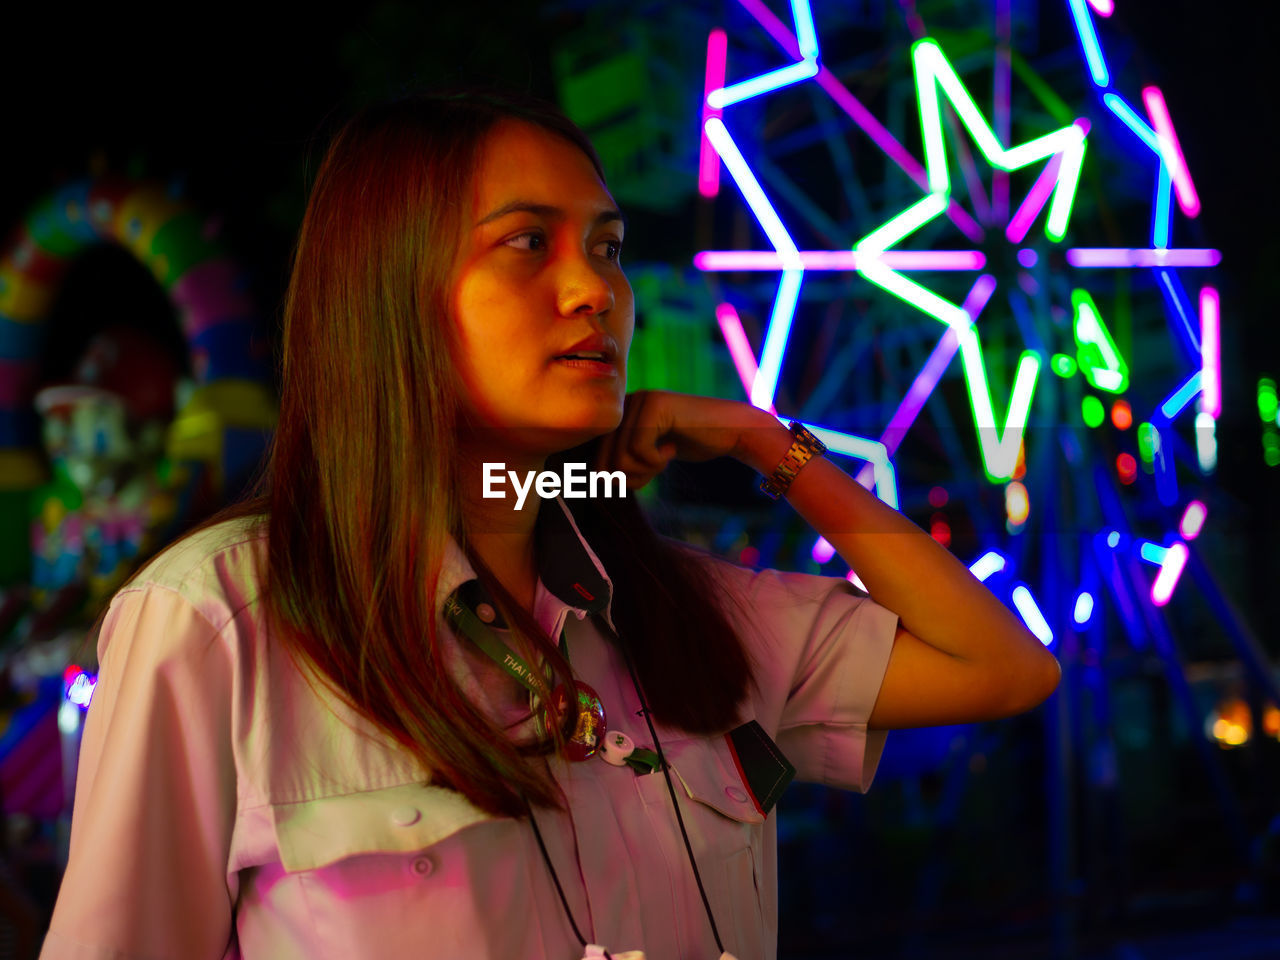 Woman looking away while standing against illuminated ferris wheel at night